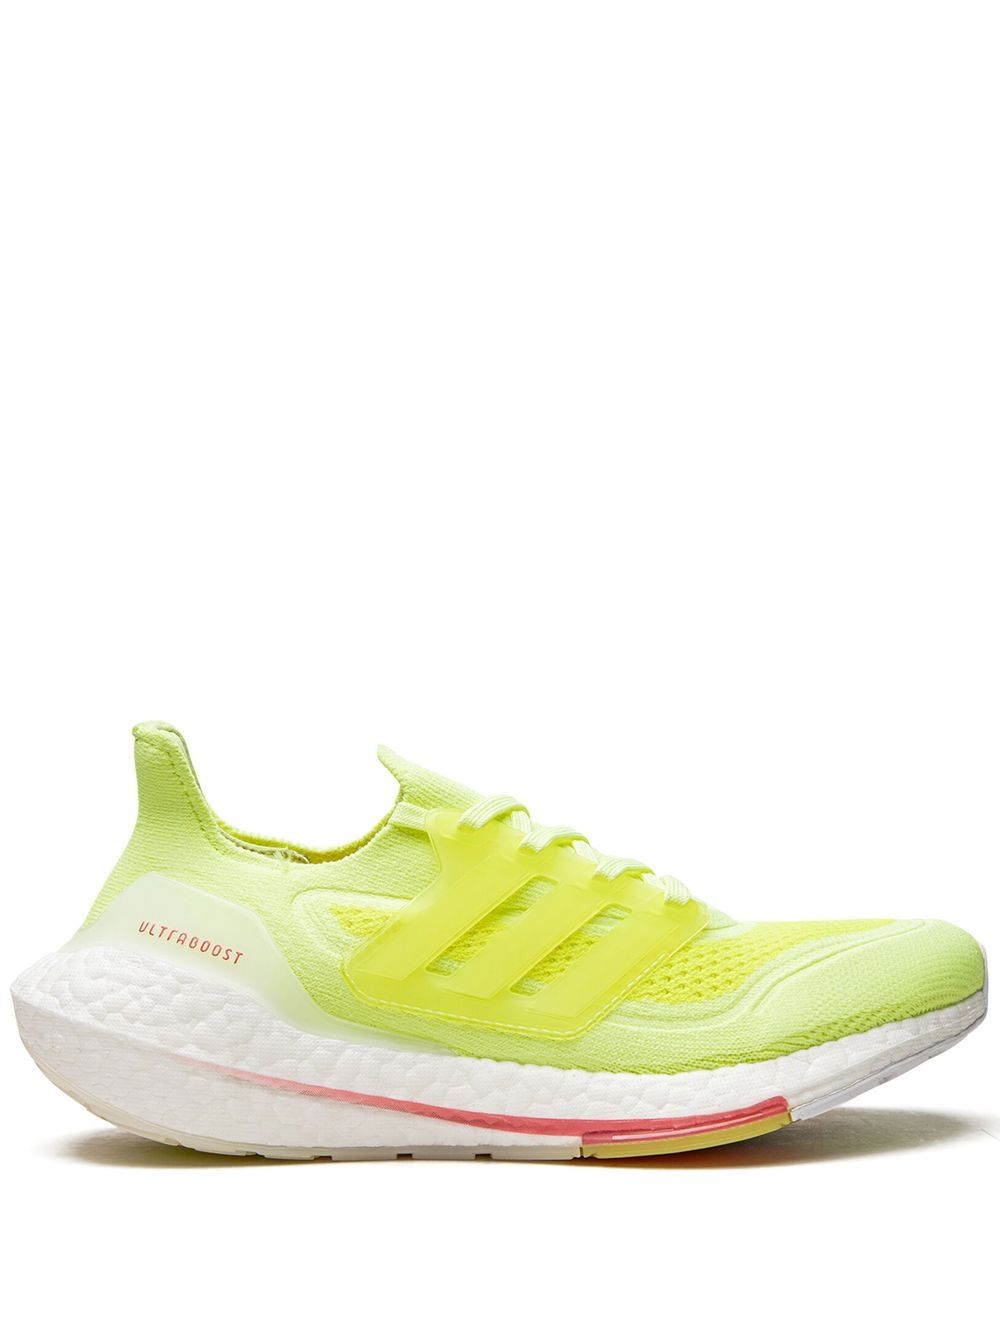 adidas Ultraboost 21 low-top sneakers - Yellow von adidas